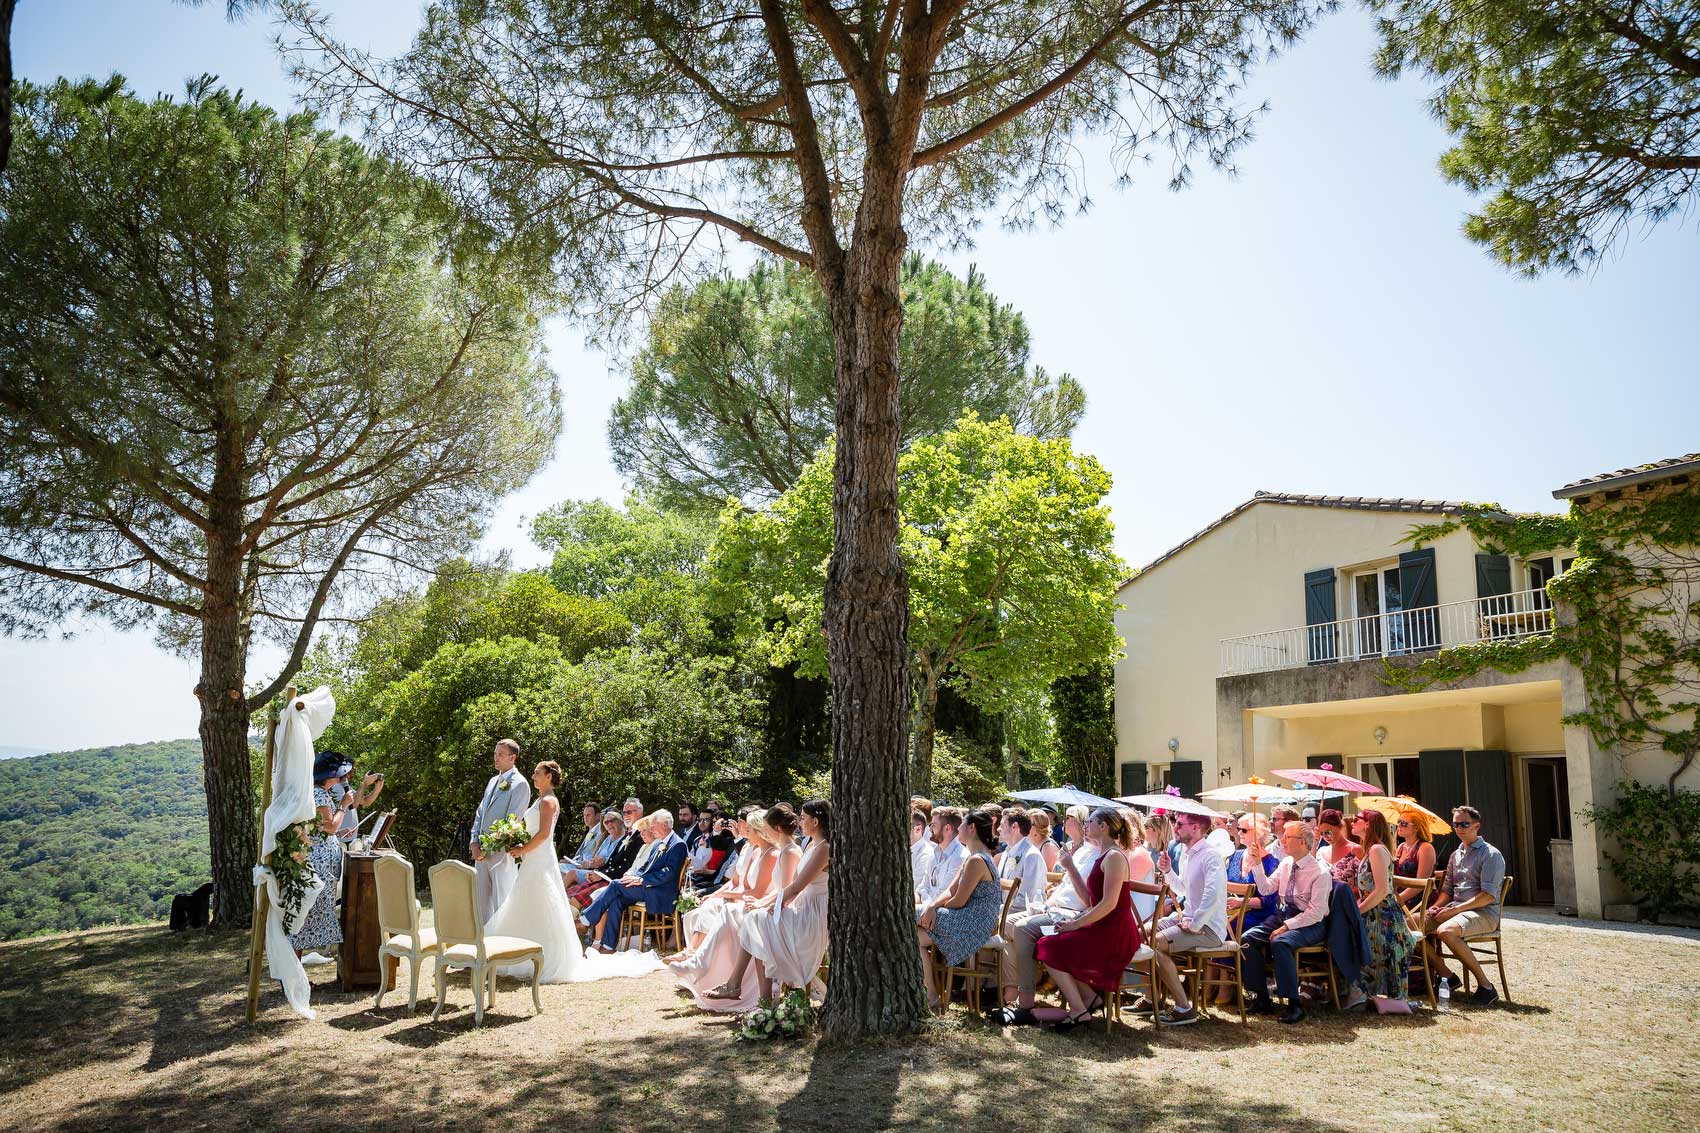 All guests in the sun at Montpellier wedding